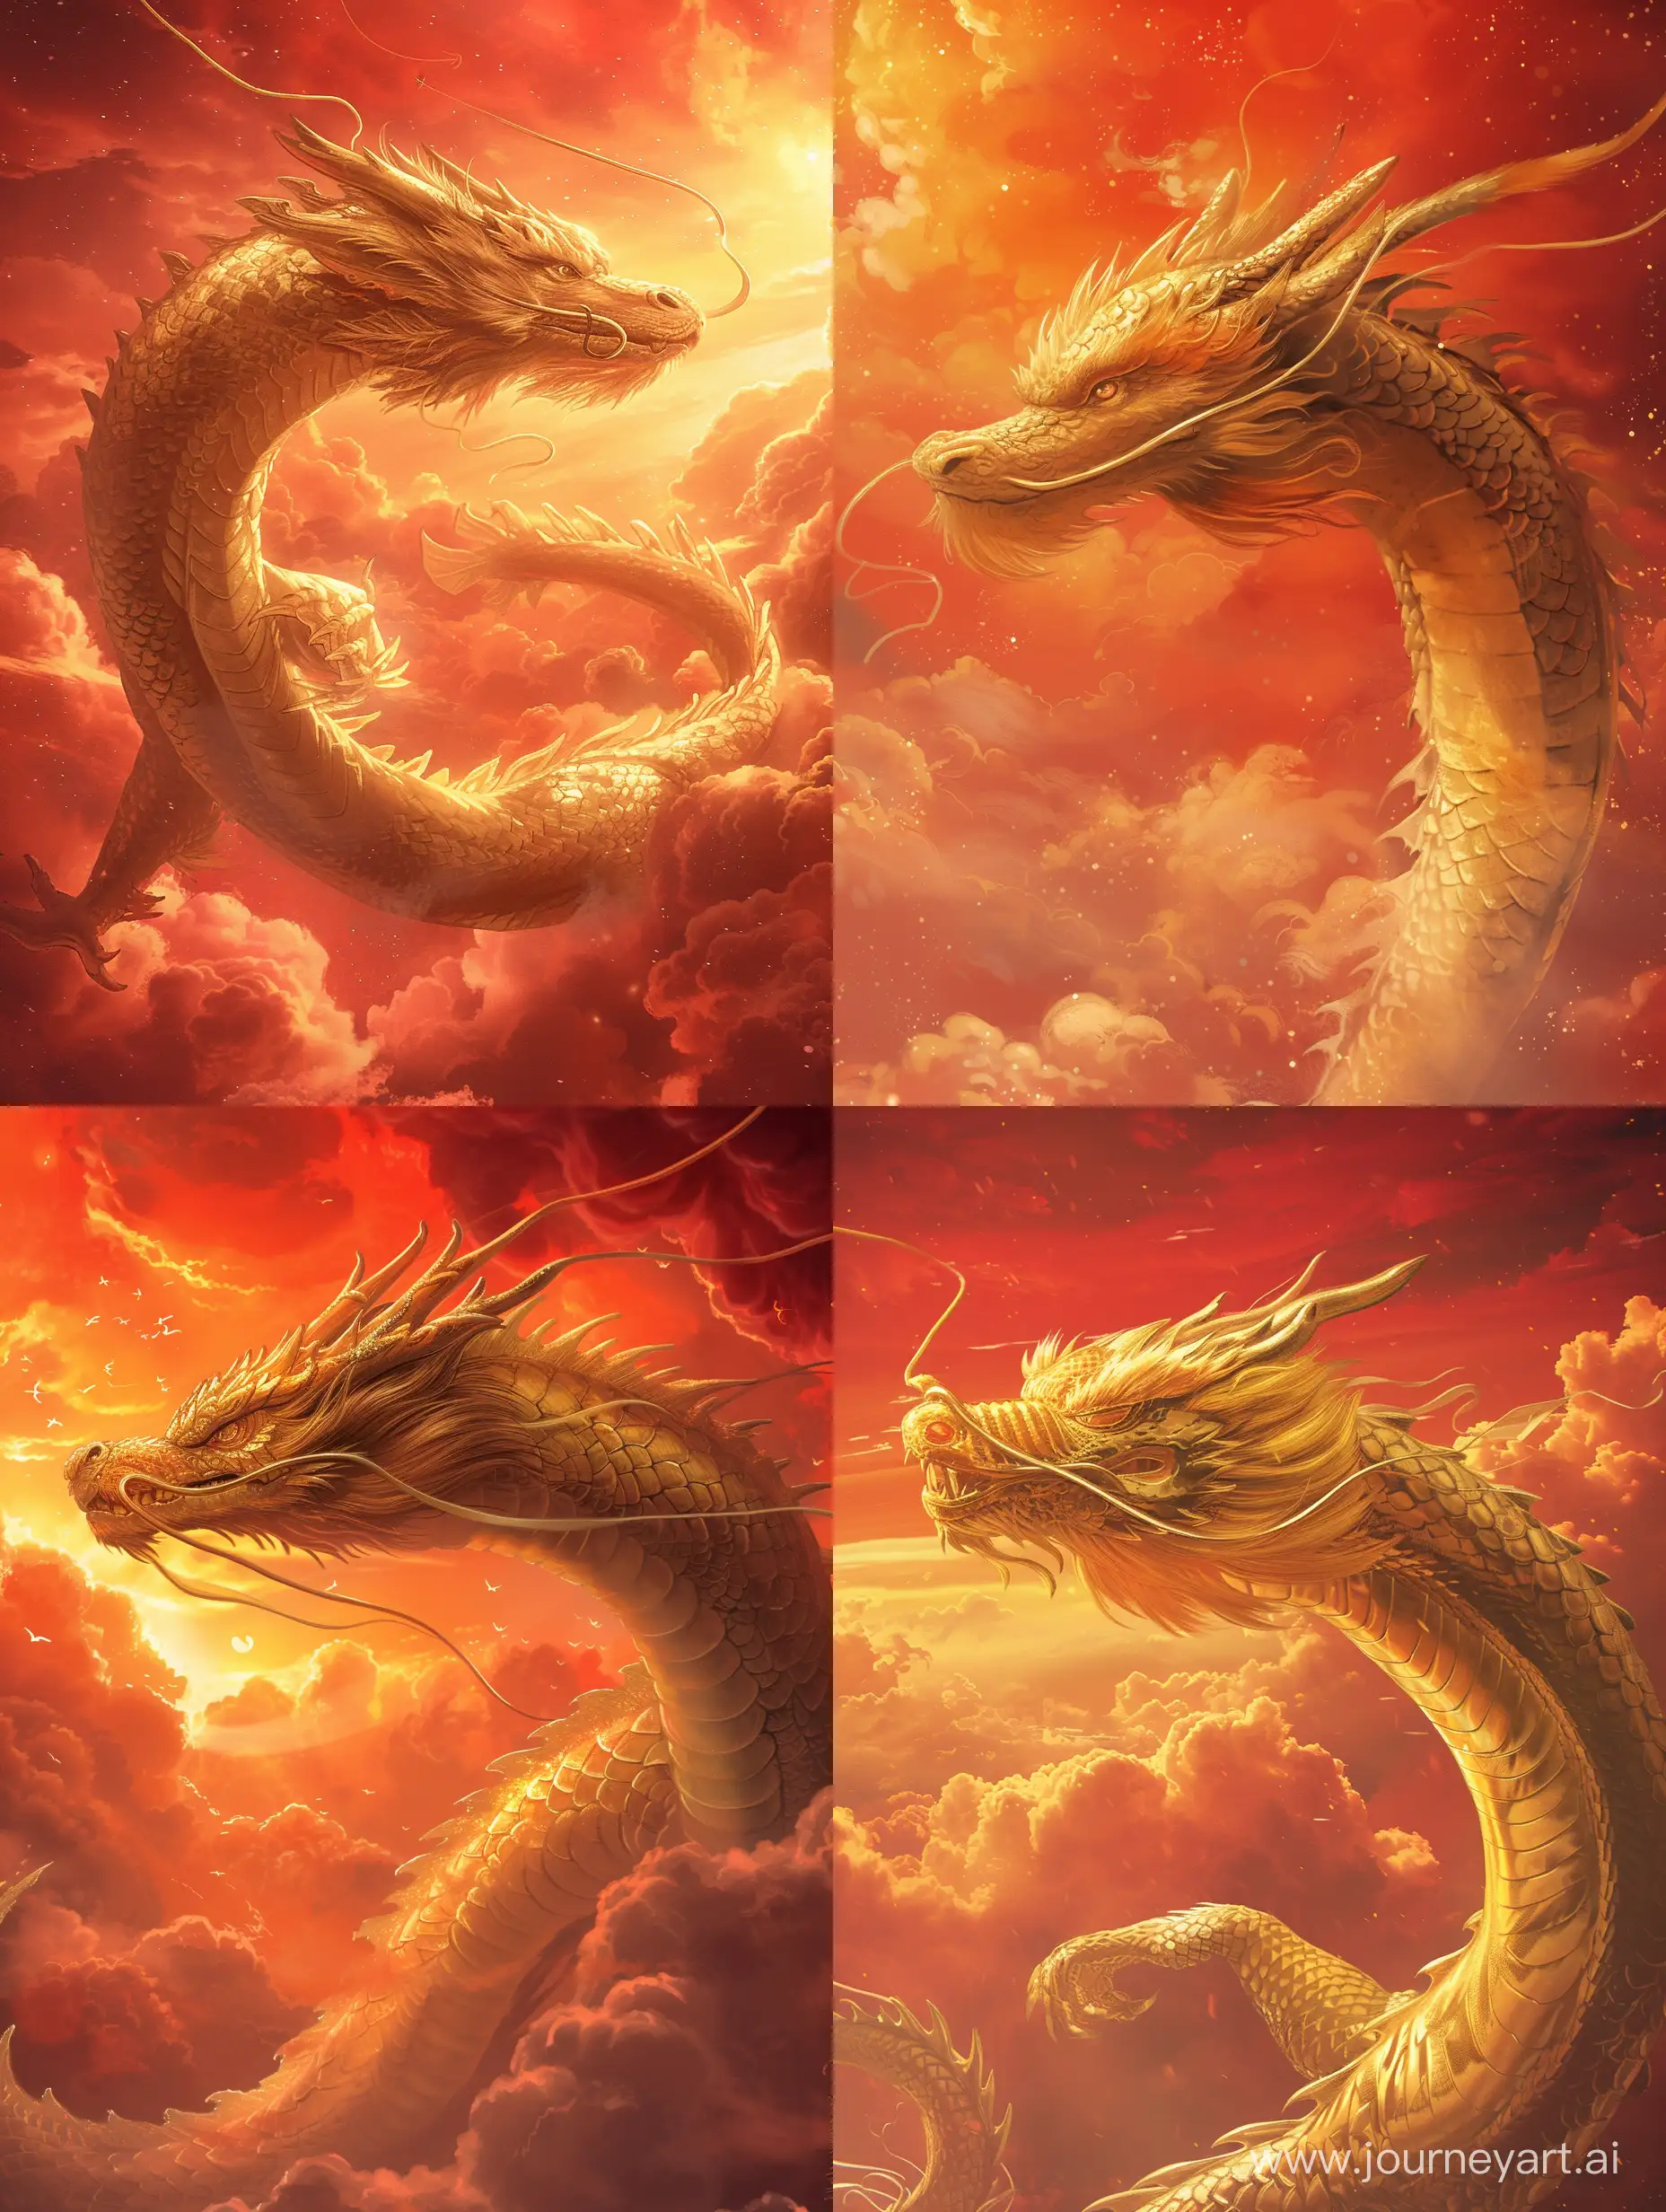 A golden dragon soars into the sky, piercing through the clouds, facing the heavens. The distinct scales and mane on the dragon reveal its majestic and heroic presence. The sky is a brilliant red, adorned with auspicious clouds, carrying a festive atmosphere. The mighty dragon ascends, embodying strength, wisdom, and good fortune. --v 6 --ar 3:4 --no 85123